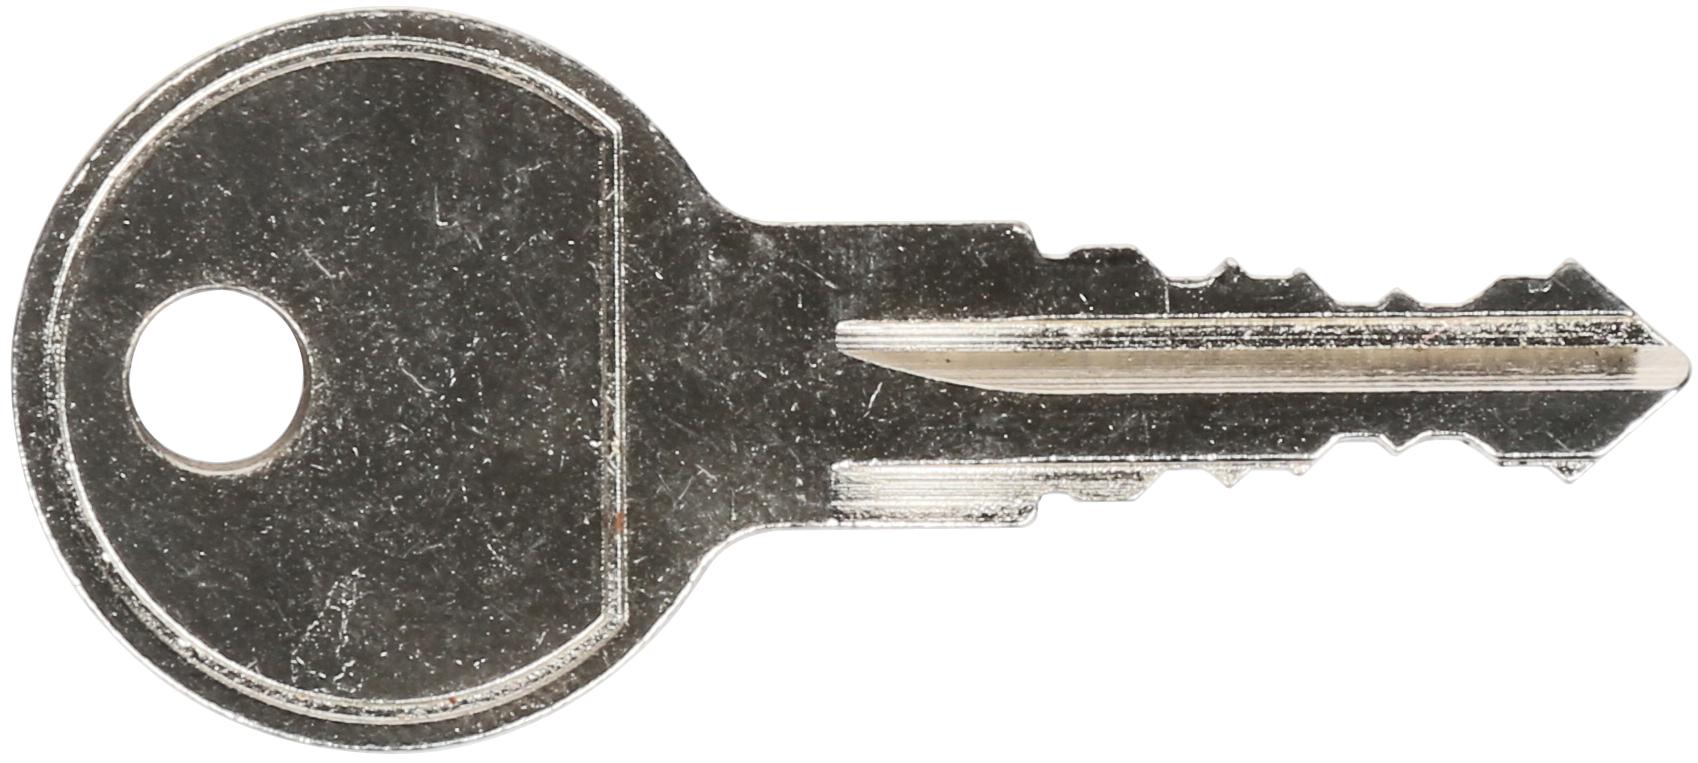 Spare Roof Box Key 093